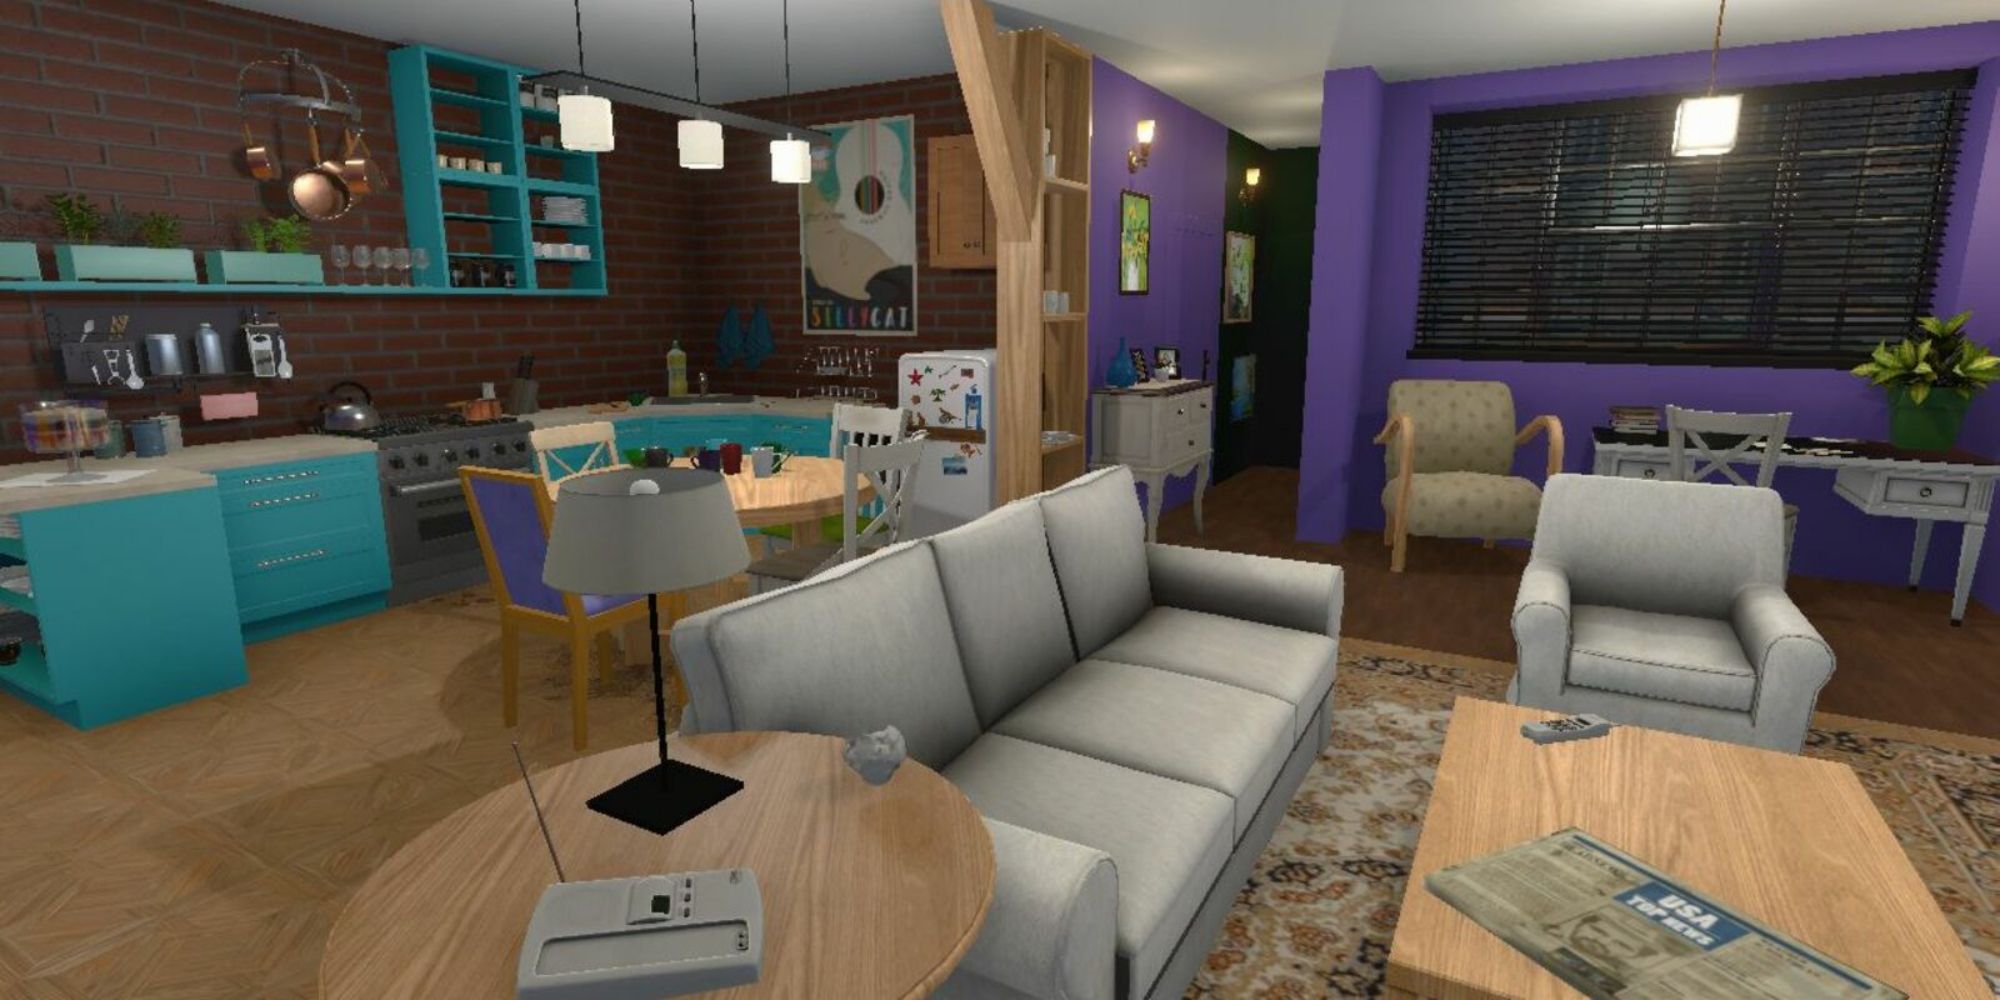 A clean apartment, a couch in the forefront and a kitchen behind it